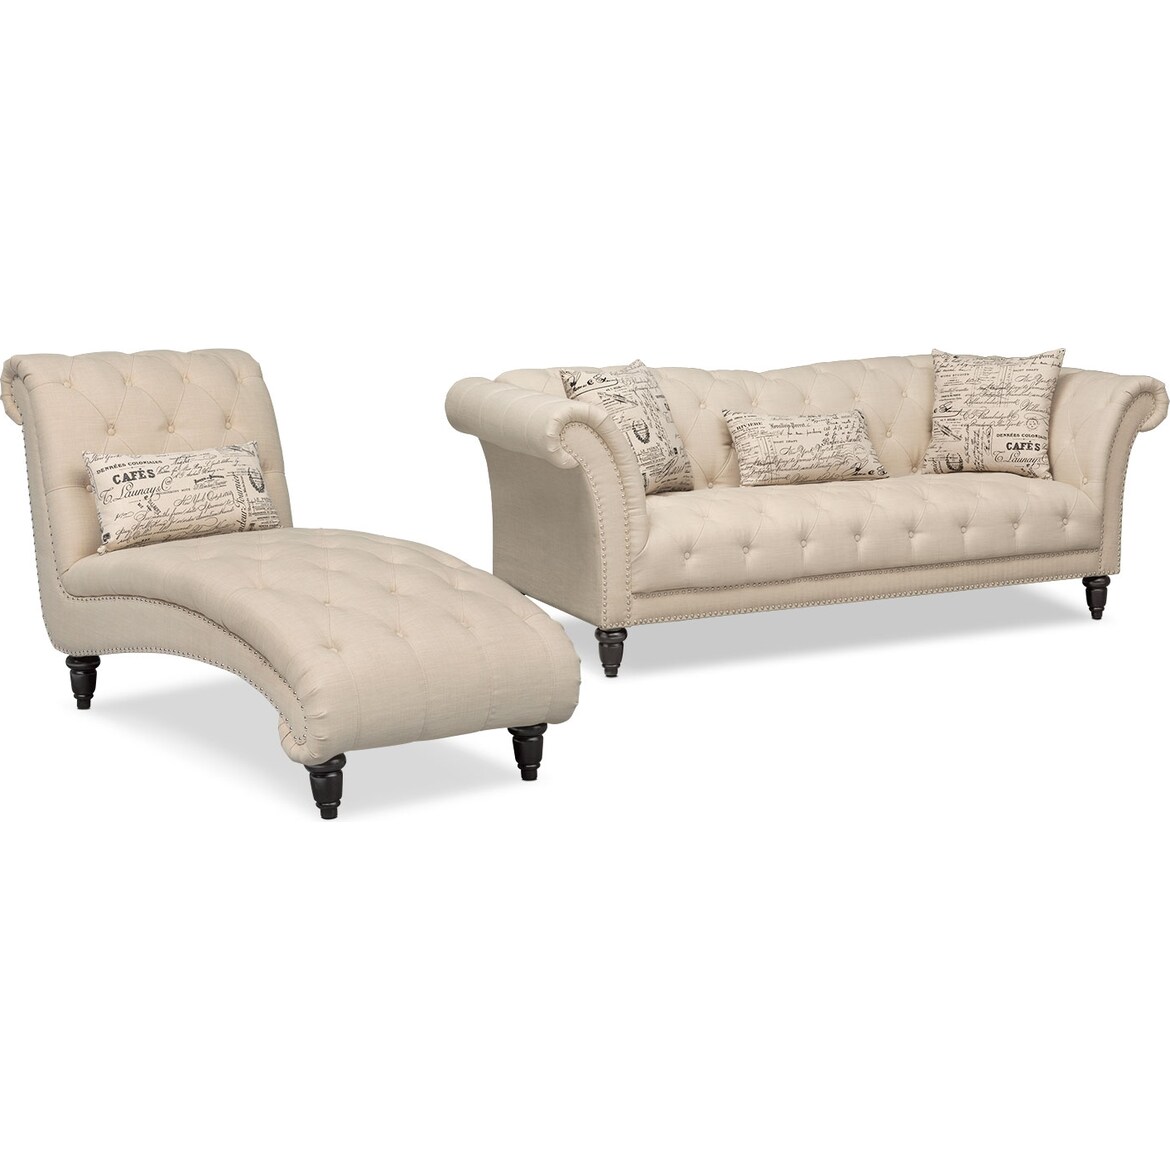 Marisol Sofa and Chaise Set Value City Furniture and